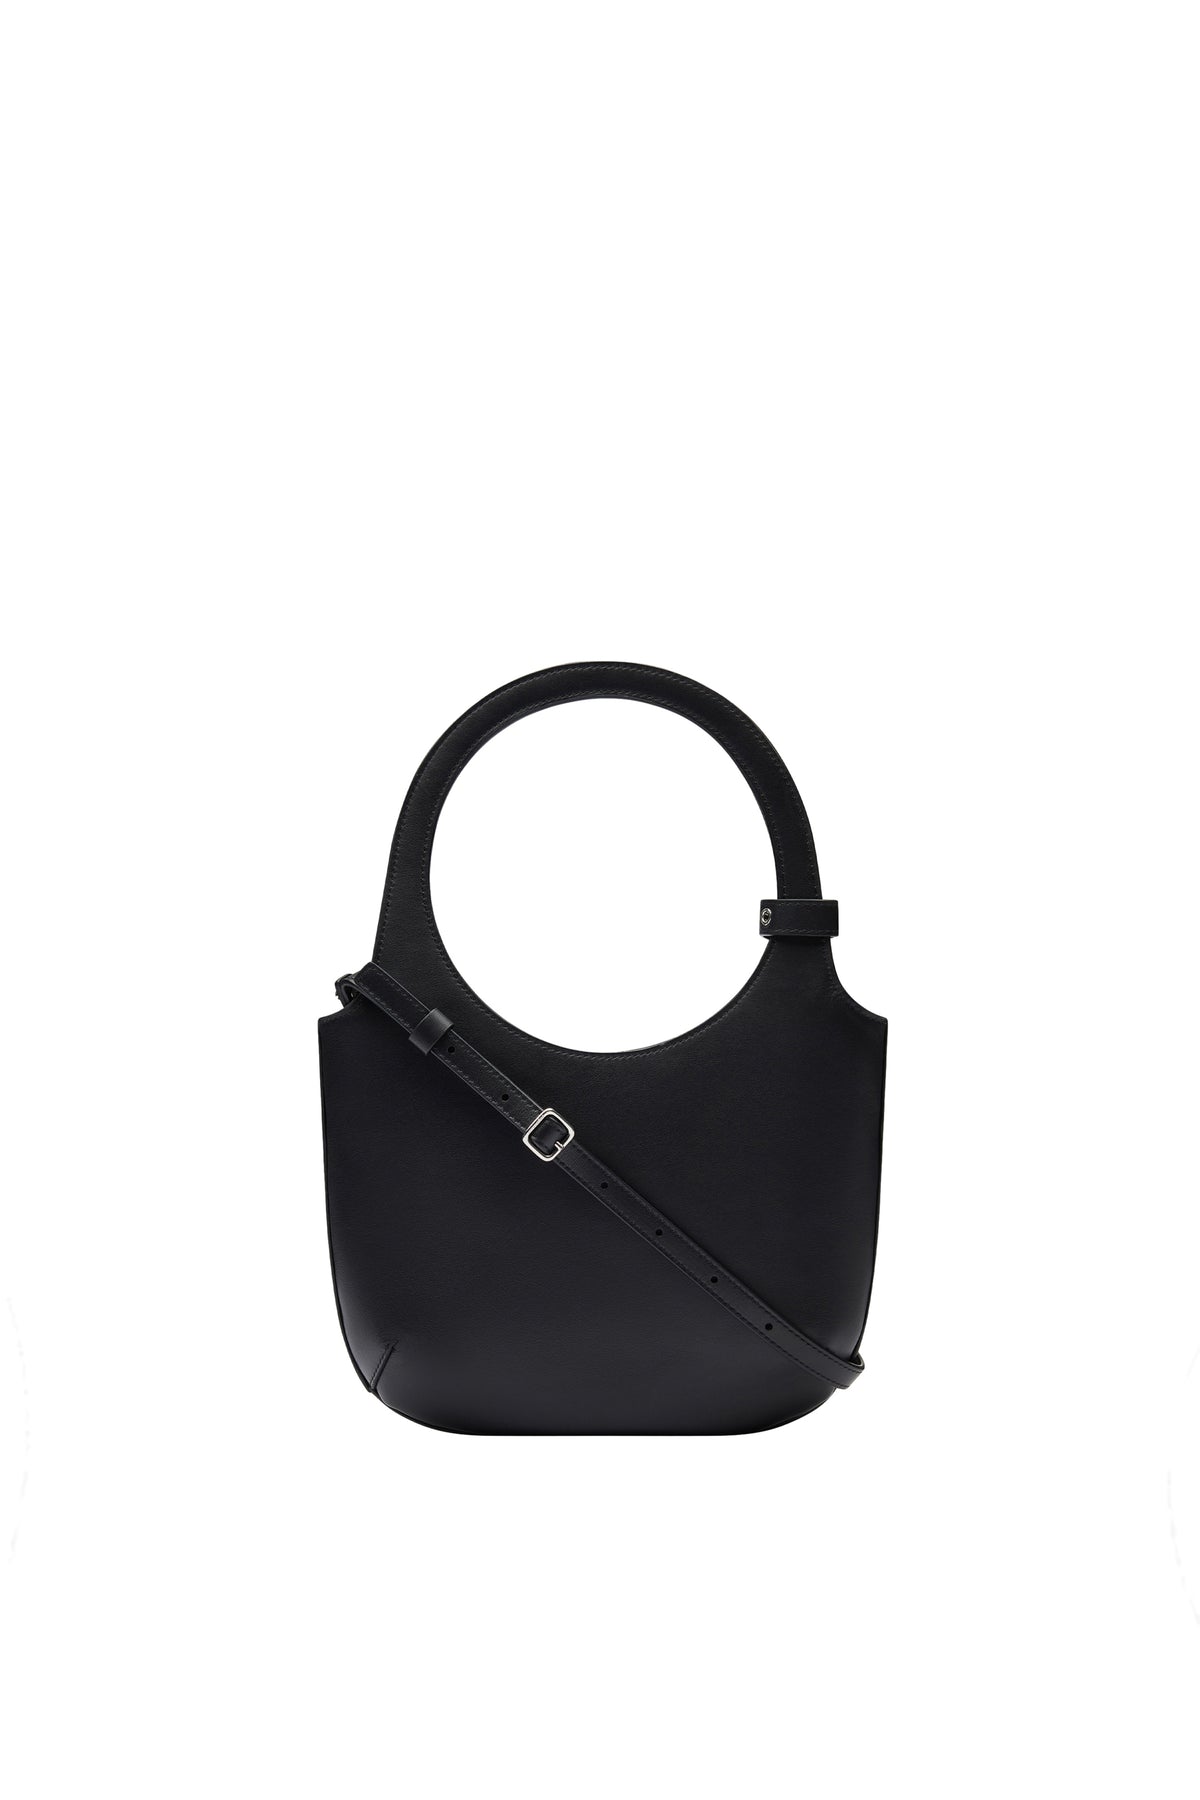 HOLY LEATHER BAG / BLK